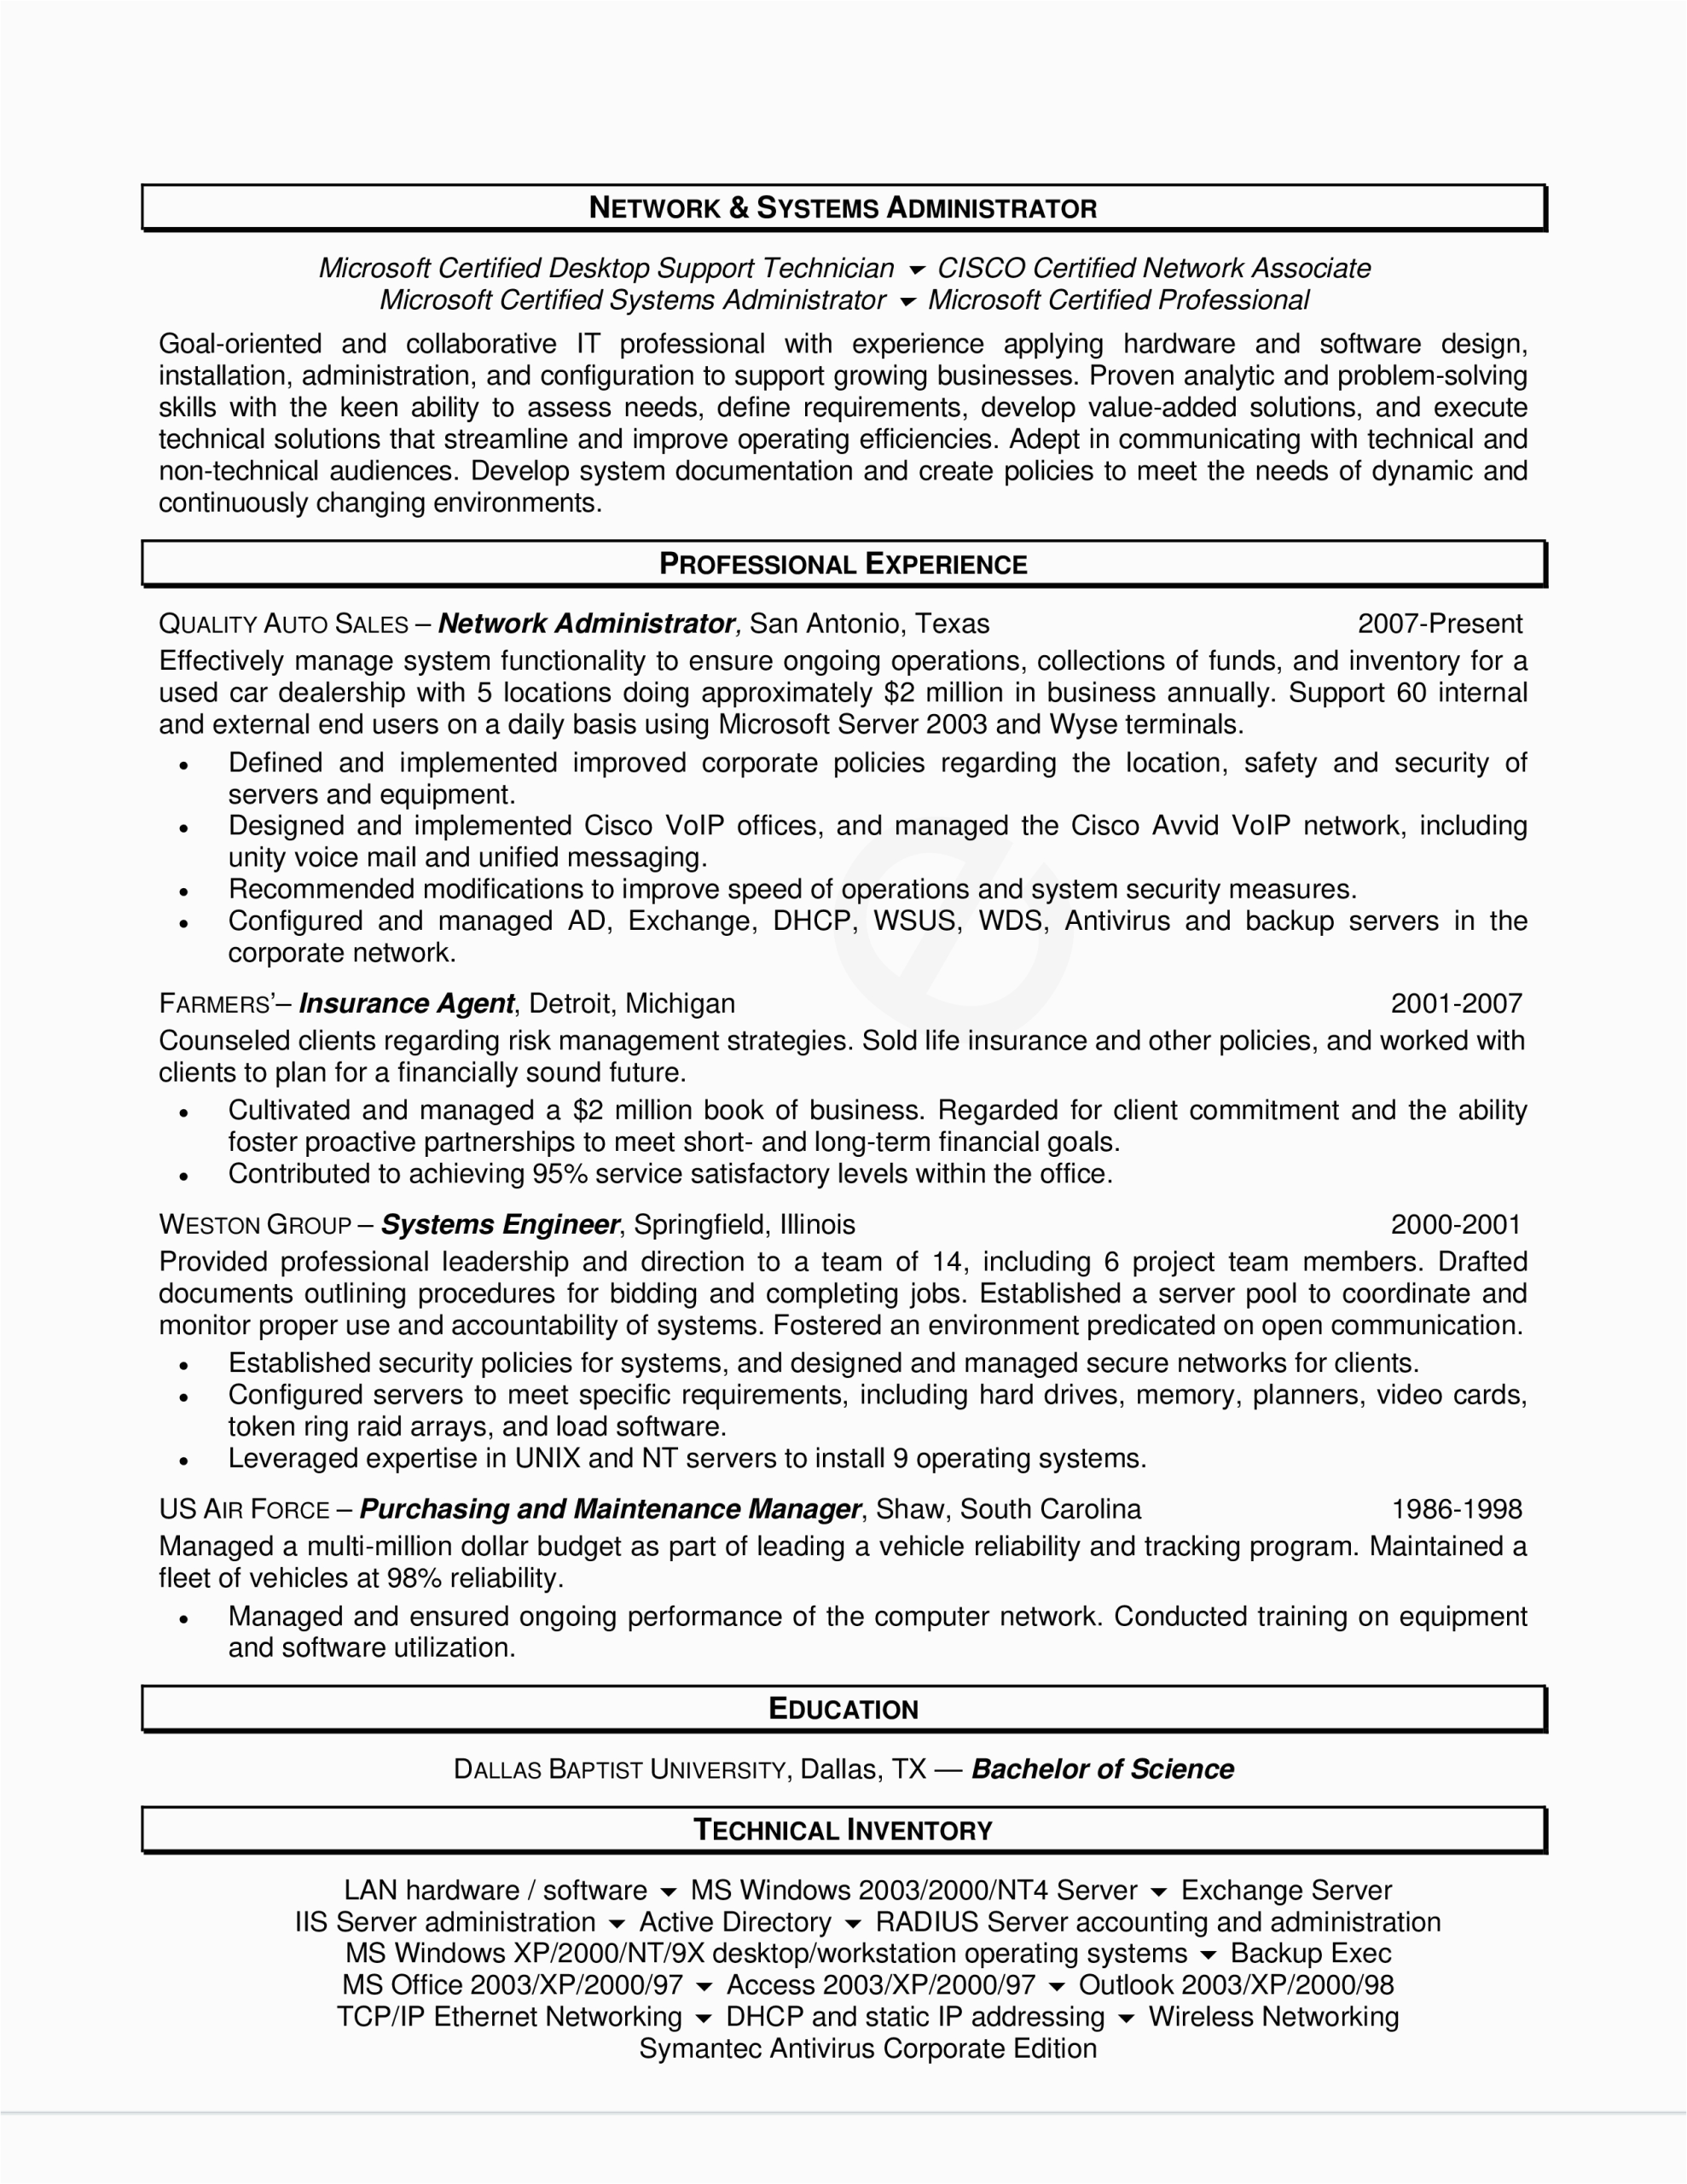 Sample Resume for A Network Administrator Network Administrator Resume